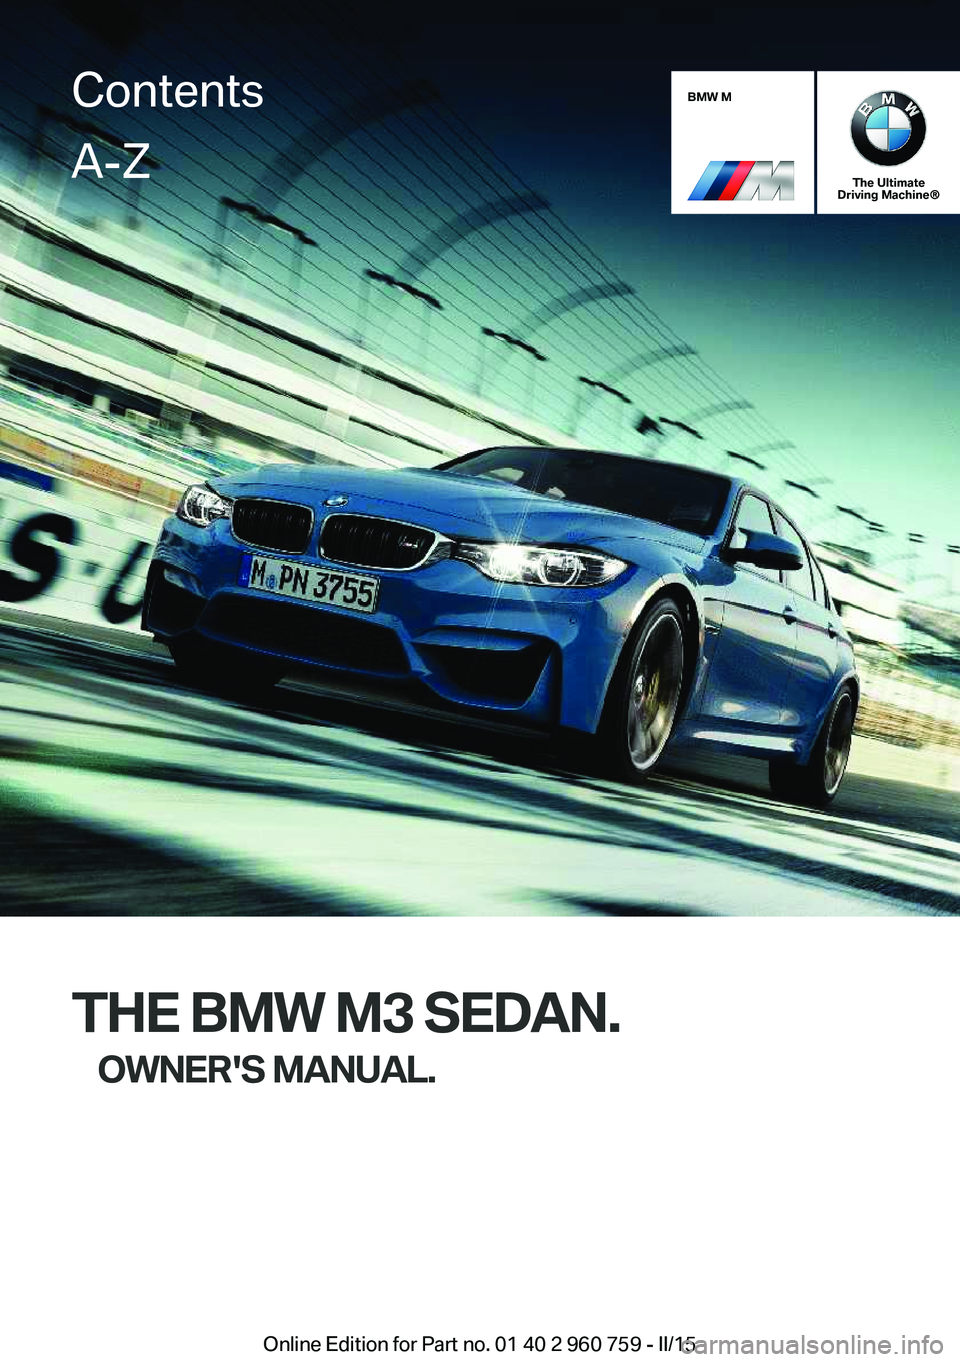 BMW M3 SEDAN 2016  Owners Manual BMW M
The Ultimate
Driving Machine®
THE BMW M3 SEDAN.
OWNER'S MANUAL.
ContentsA-Z
Online Edition for Part no. 01 40 2 960 759 - II/15   